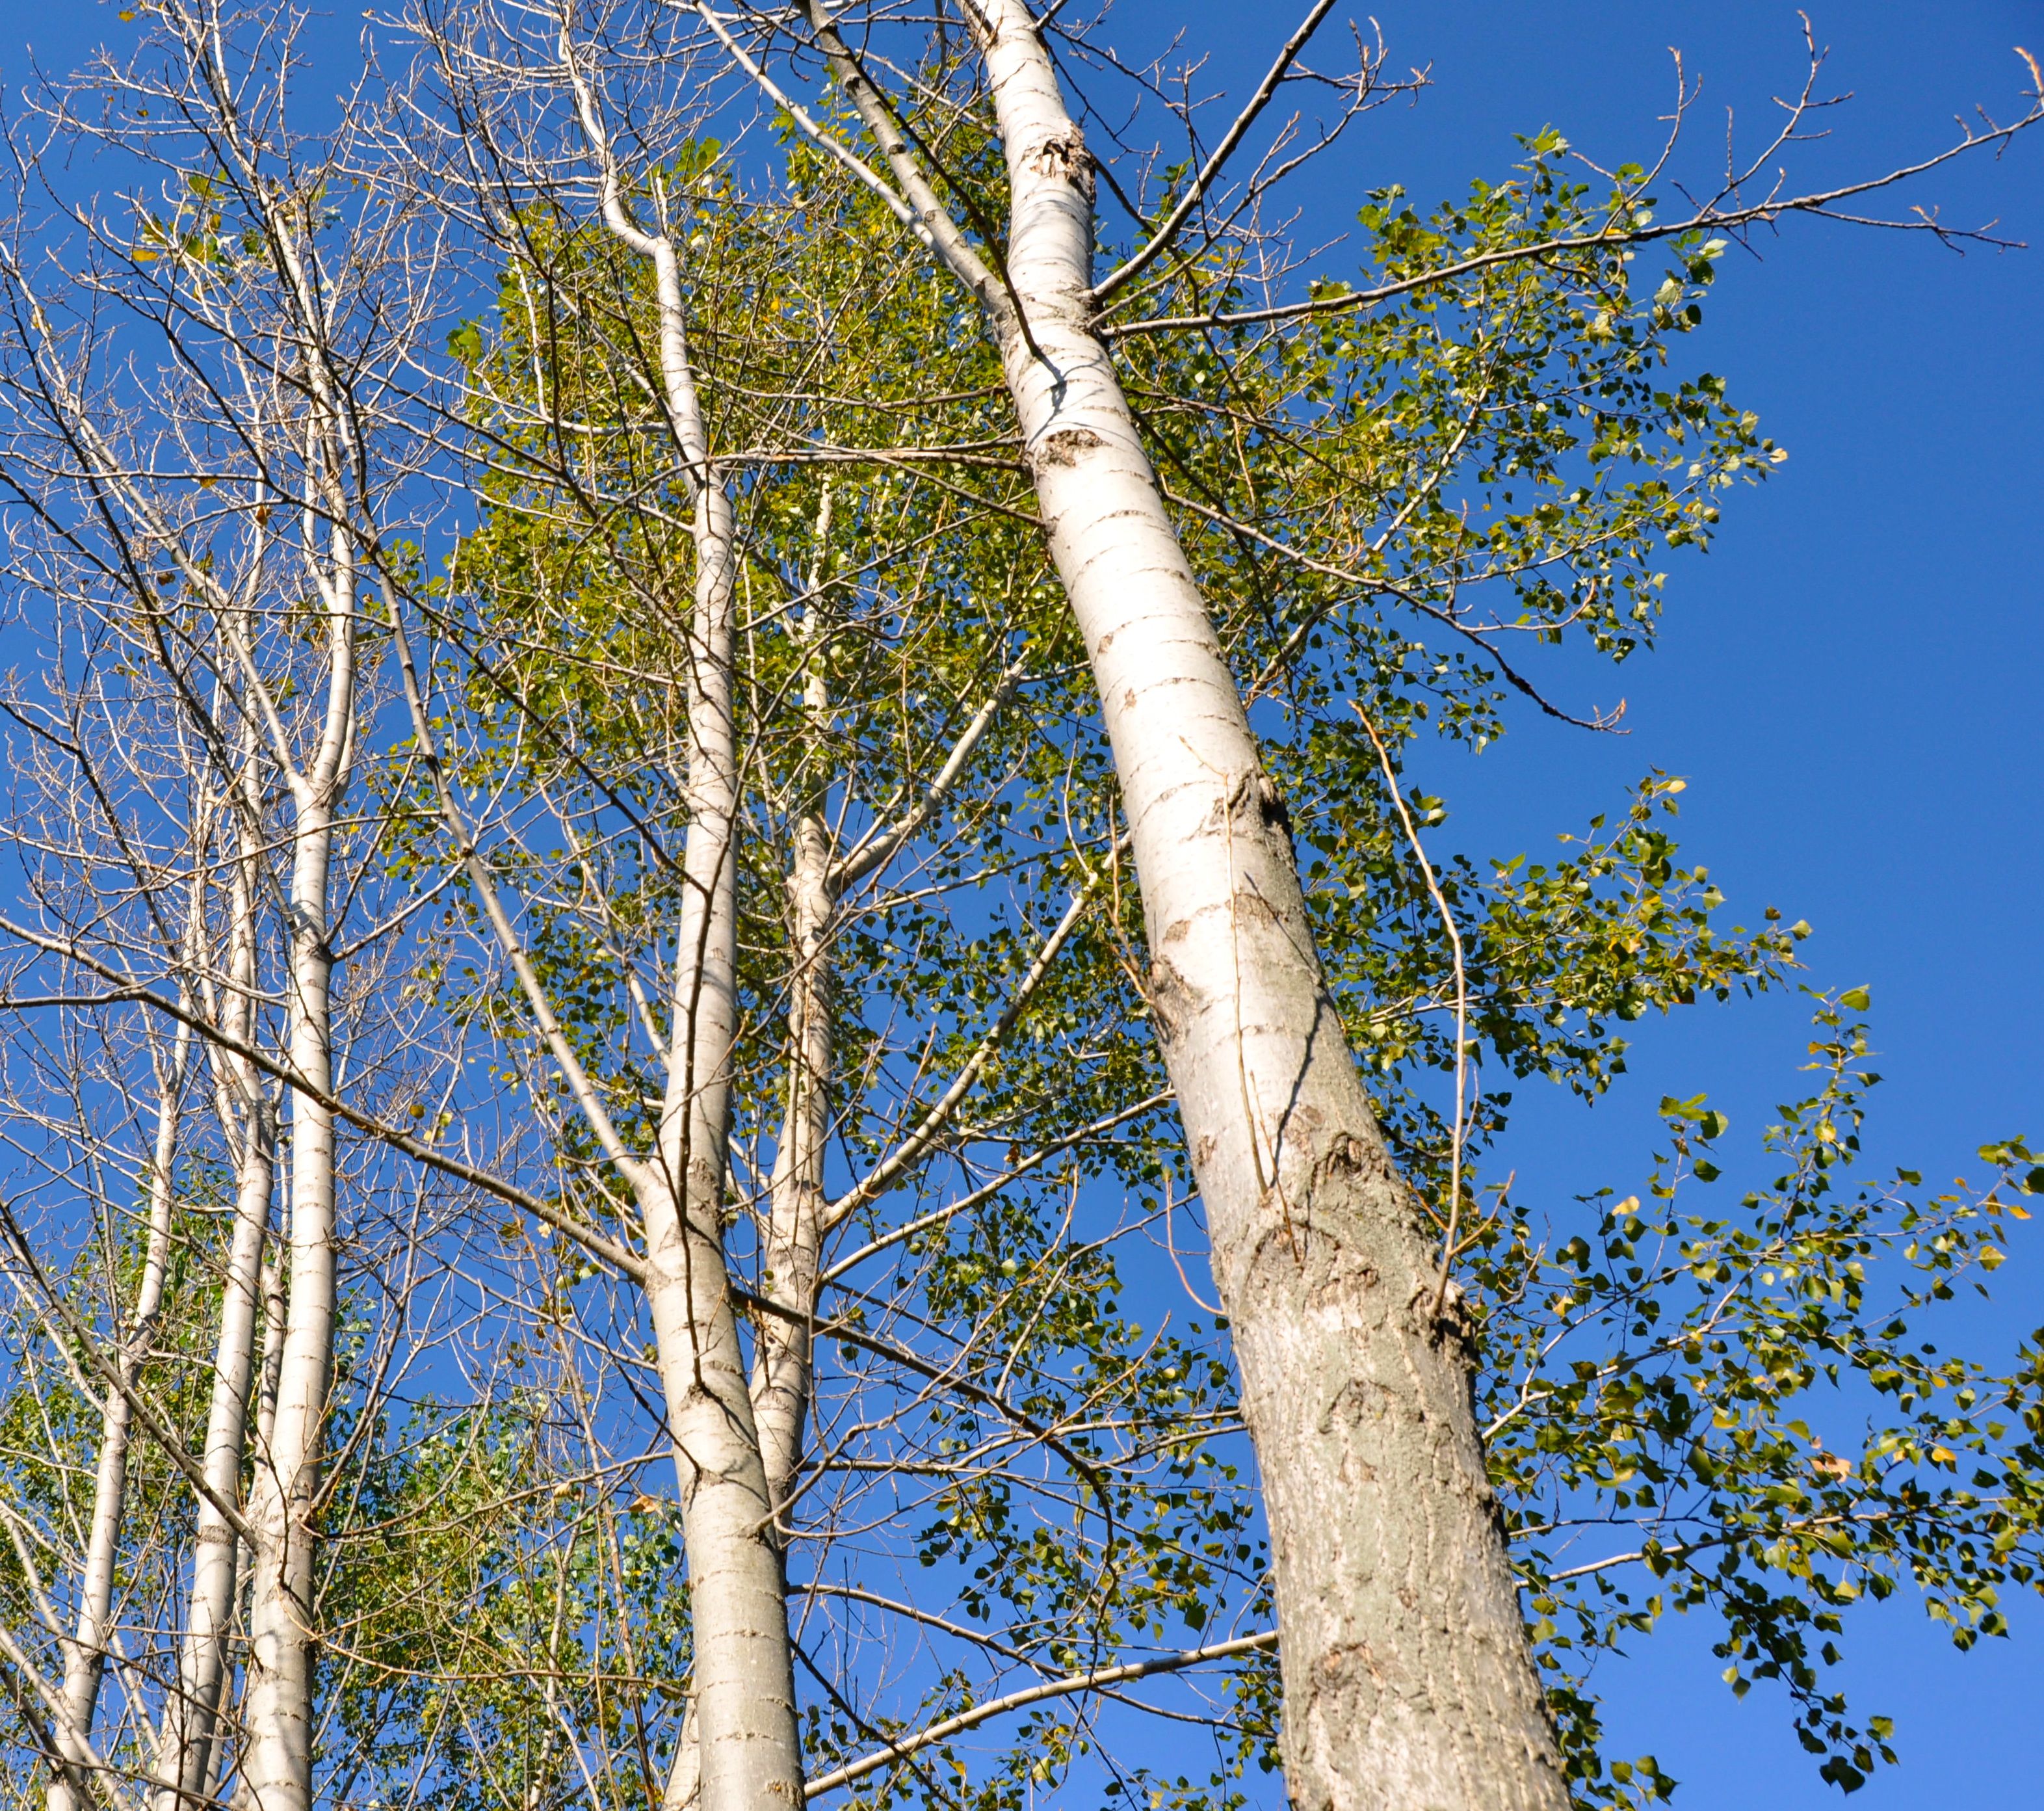 What are the different types of poplar trees?